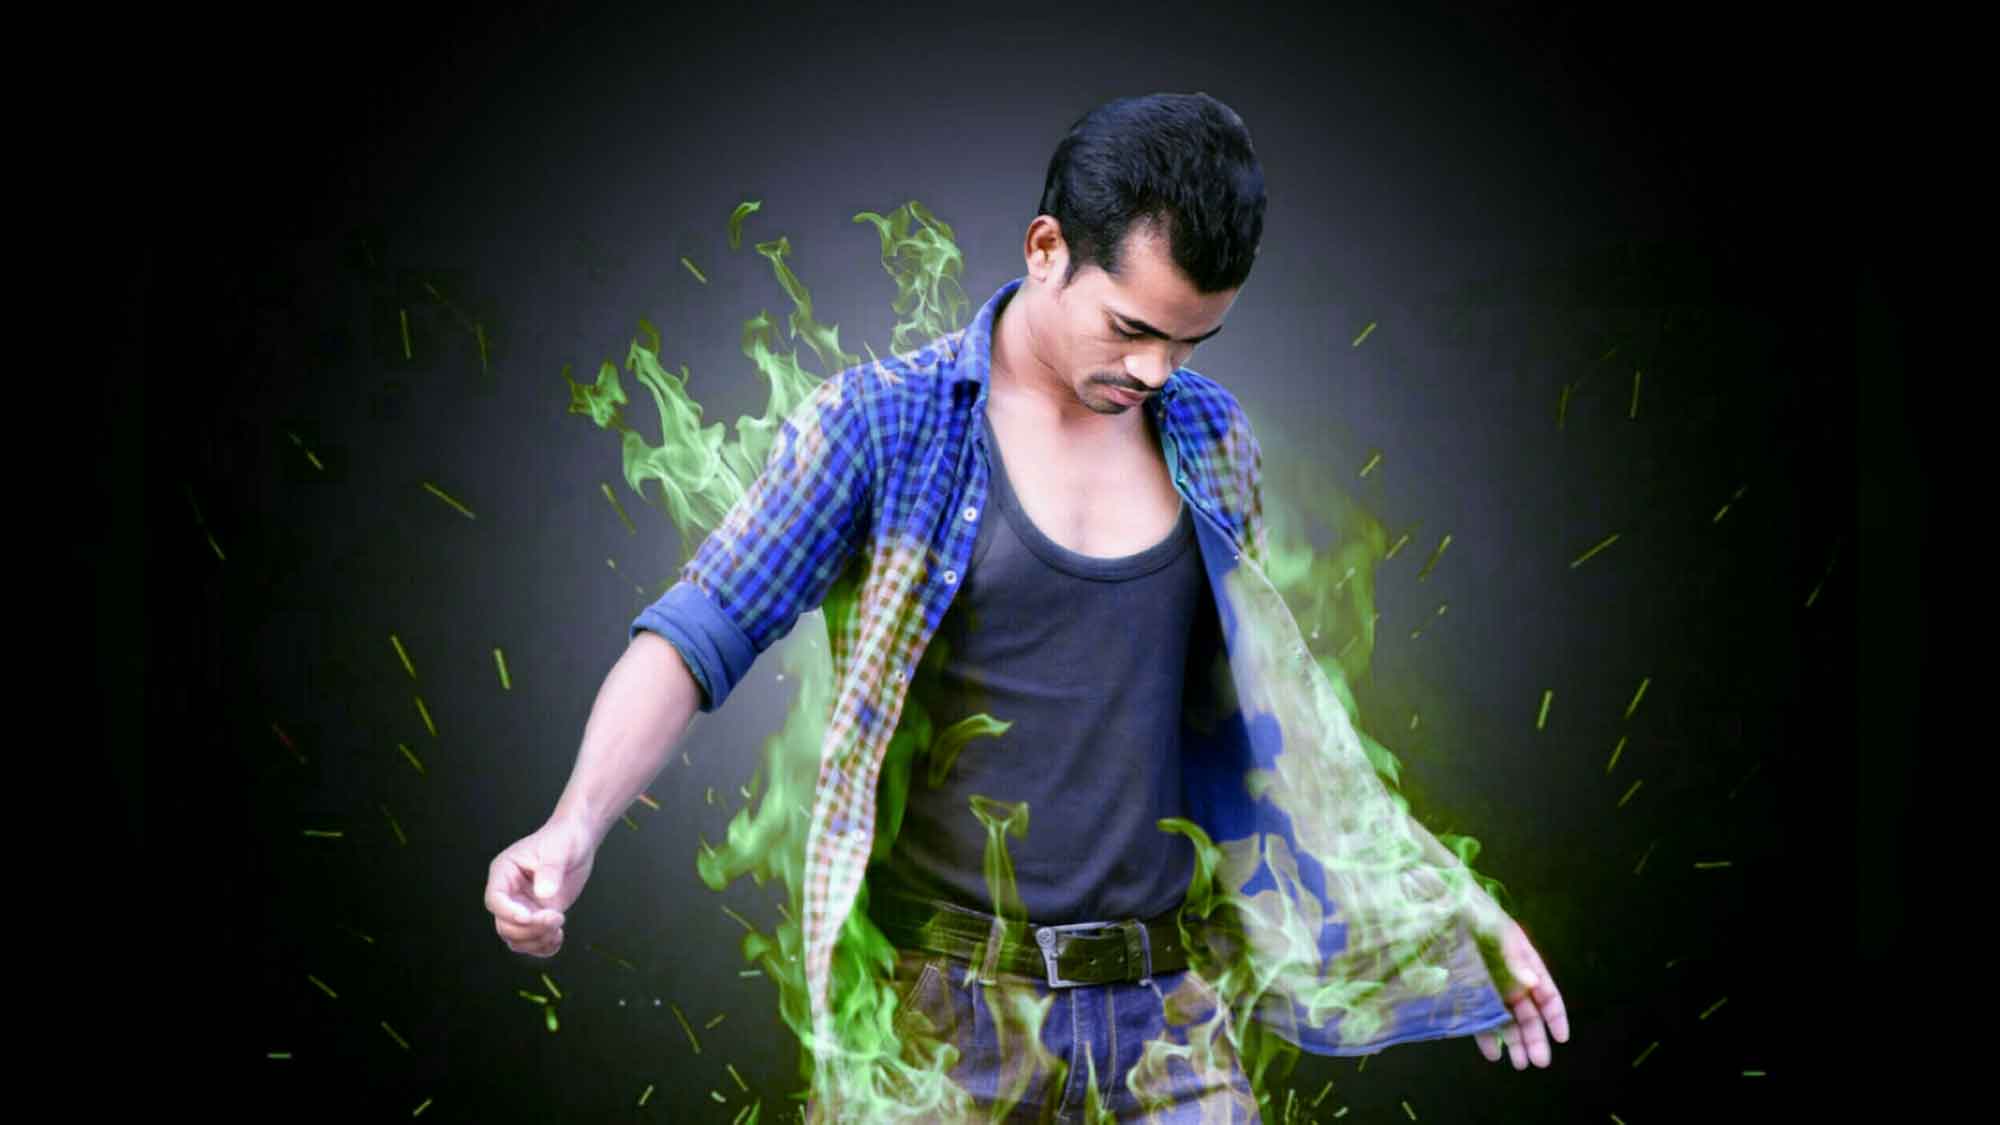 The green flame. PICSART. Green Flame Effect. Photo Manipulation PICSART. PICSART Effects in Photoshop.